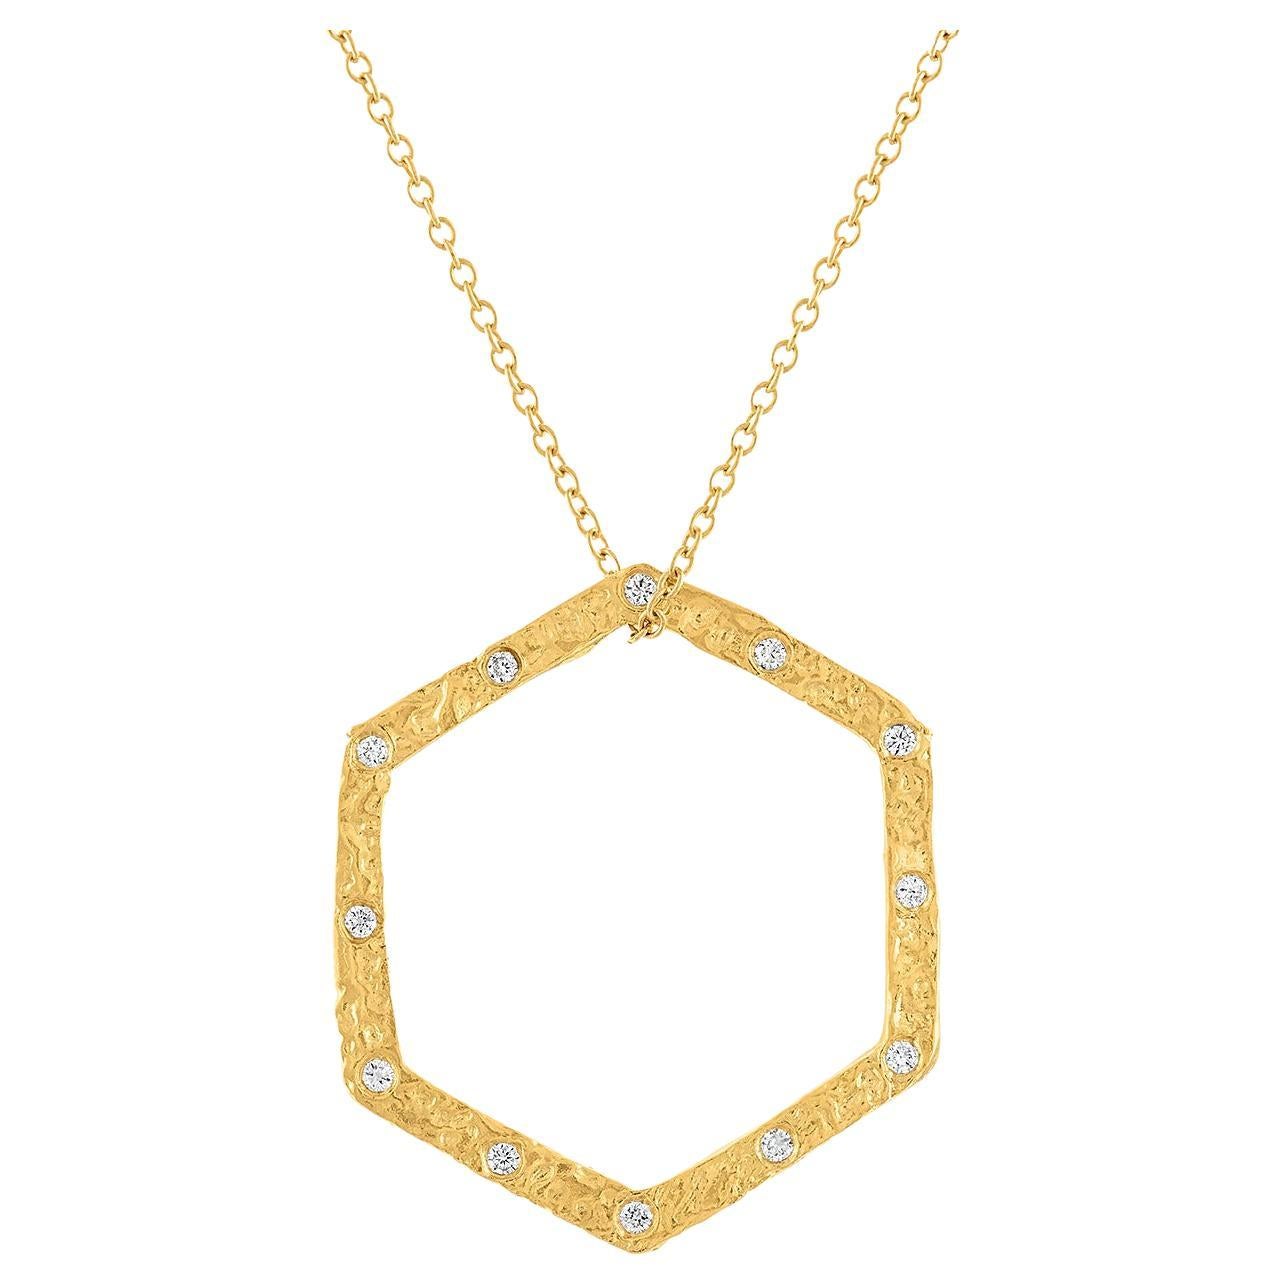 The Hexagon Diamond Necklace in 22k Gold